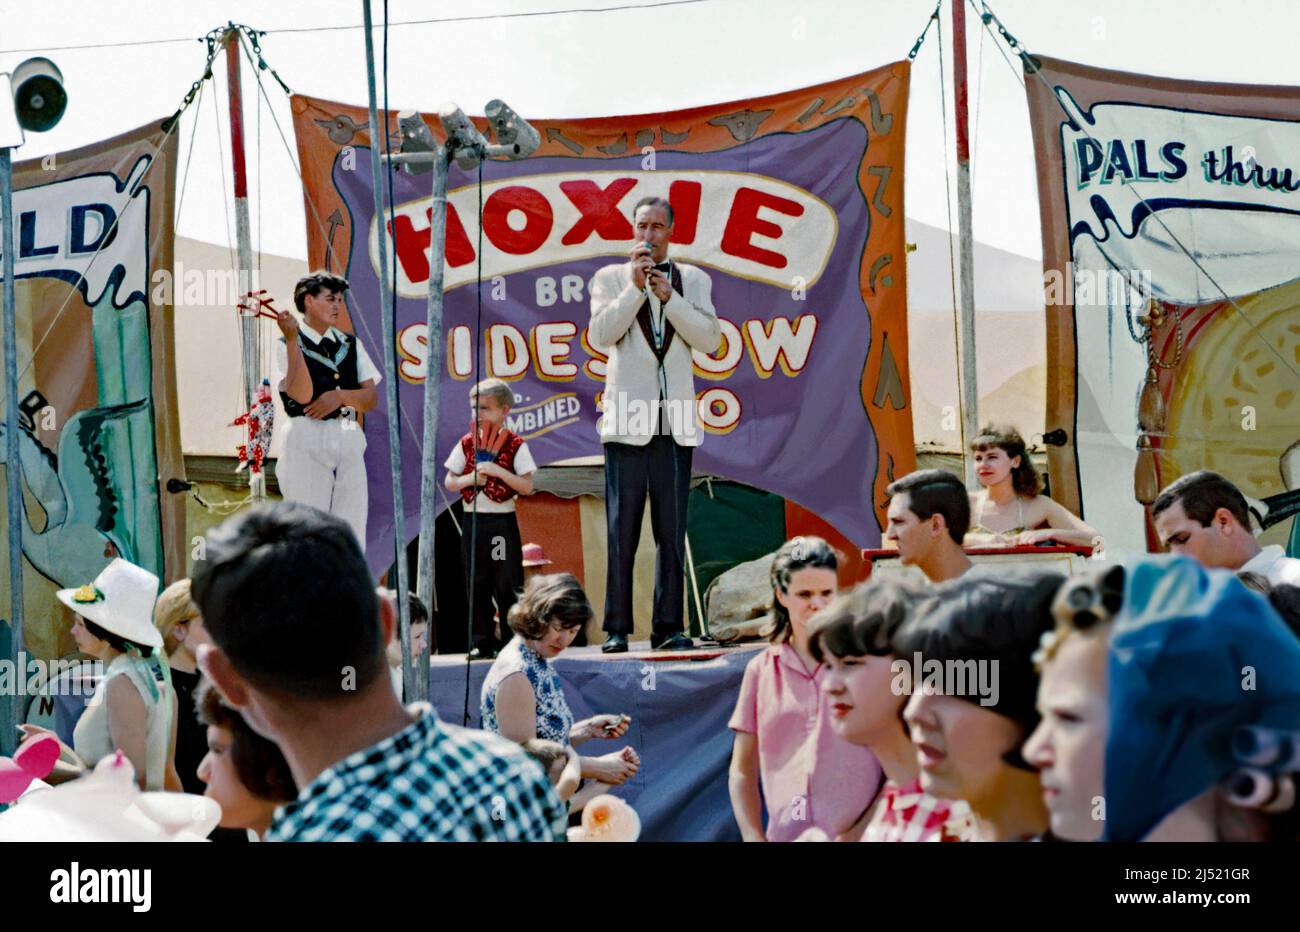 An announcer or barker with a microphone addressing the passing crowds outside the Hoxie Brothers Sideshow and Combined Zoo at its travelling circus in the USA in 1965. Alongside him is a boy holding knives and a young man with two clown puppets. Behind are colourful hand-painted banners advertising the attractions. This image is from an old American amateur (badly damaged) colour transparency. It has been heavily retouched and will look its best used at small sizes – a vintage 1960s photograph. Stock Photo